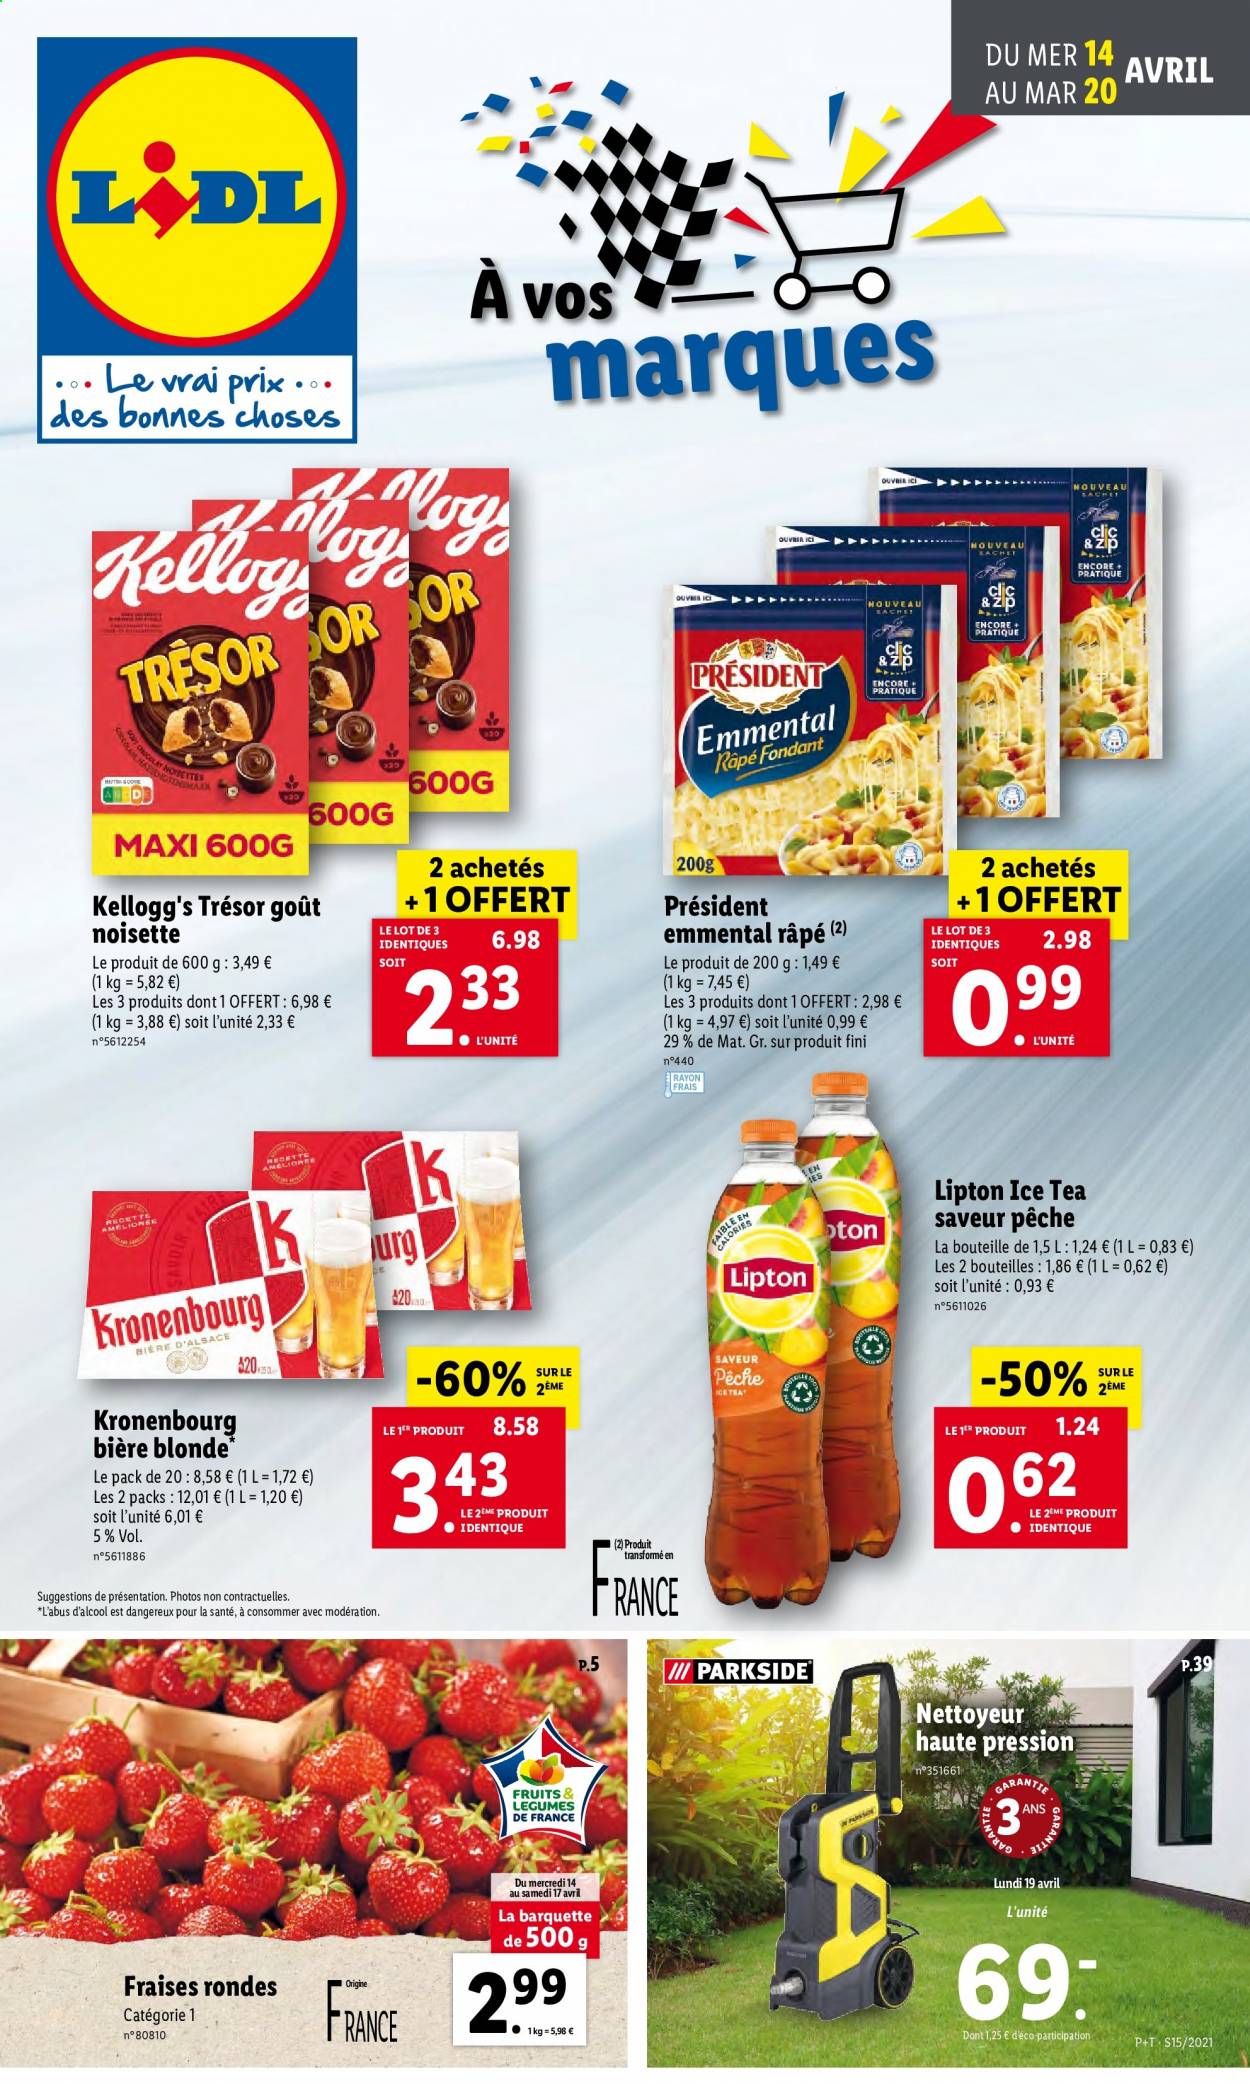 Catalogue Lidl - 14.04.2021 - 20.04.2021. Page 1.